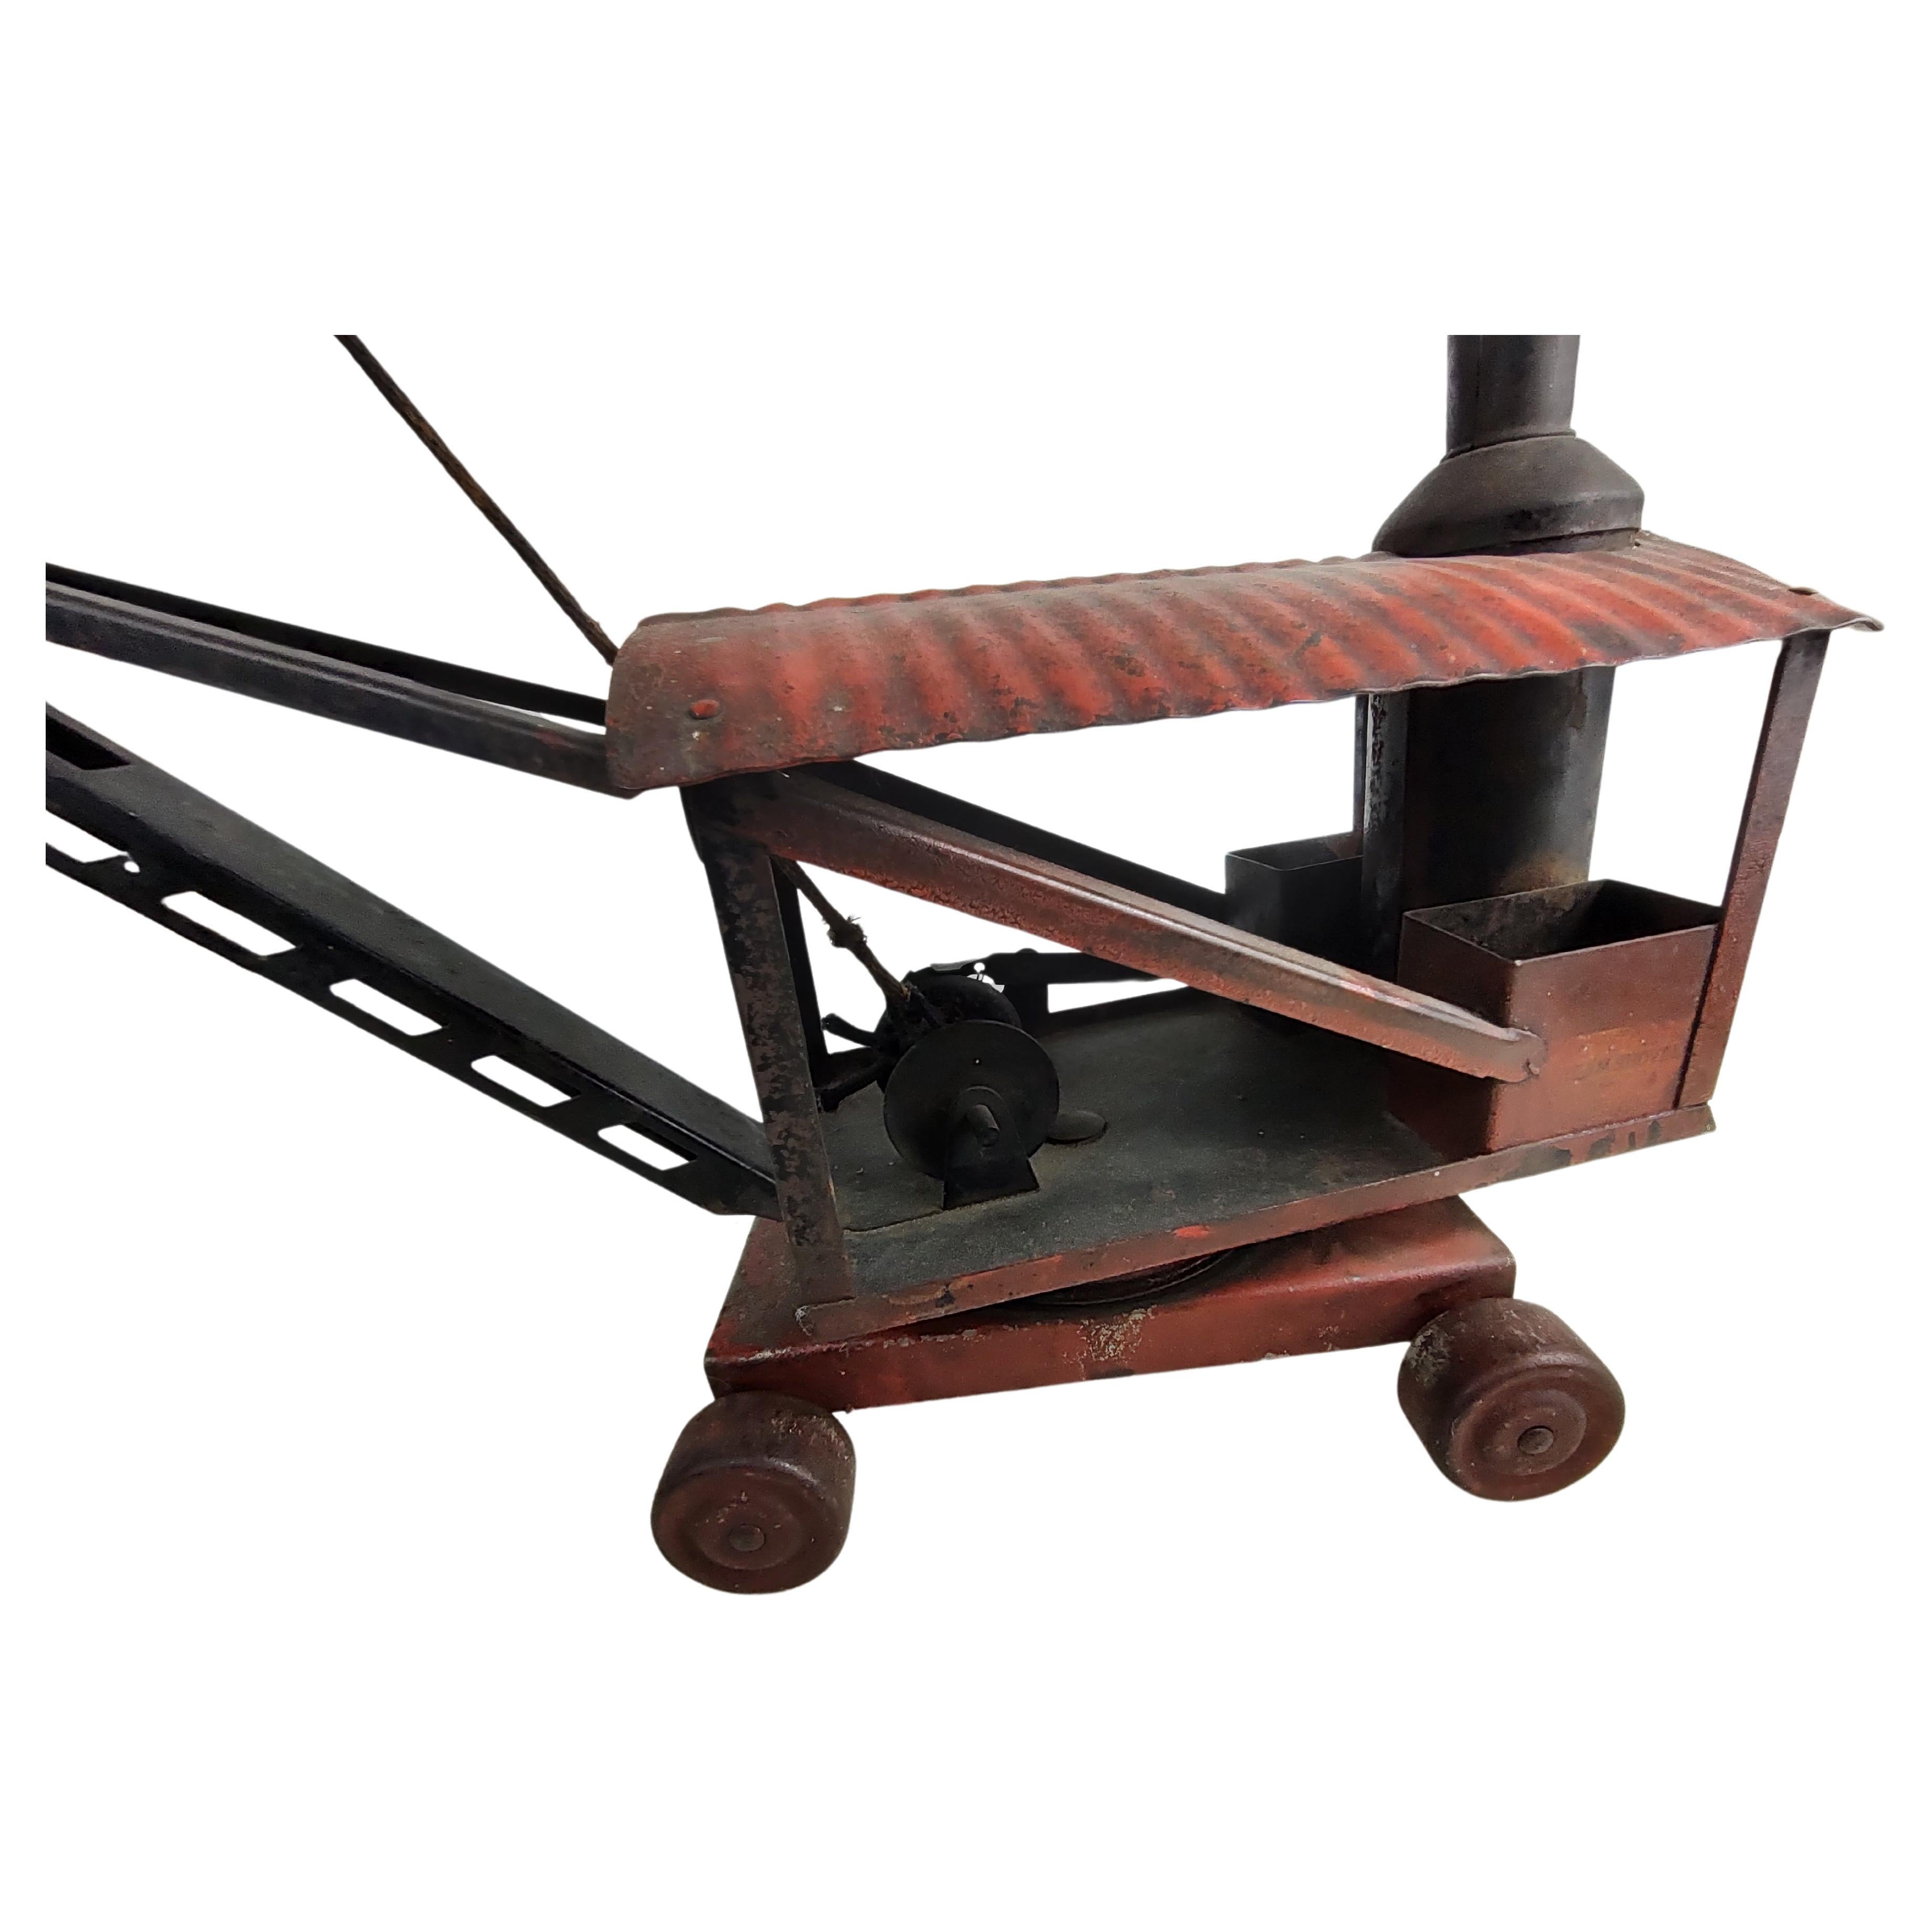 Painted Early 20th Century Keystone Pressed Steel Toy Steam Shovel For Sale